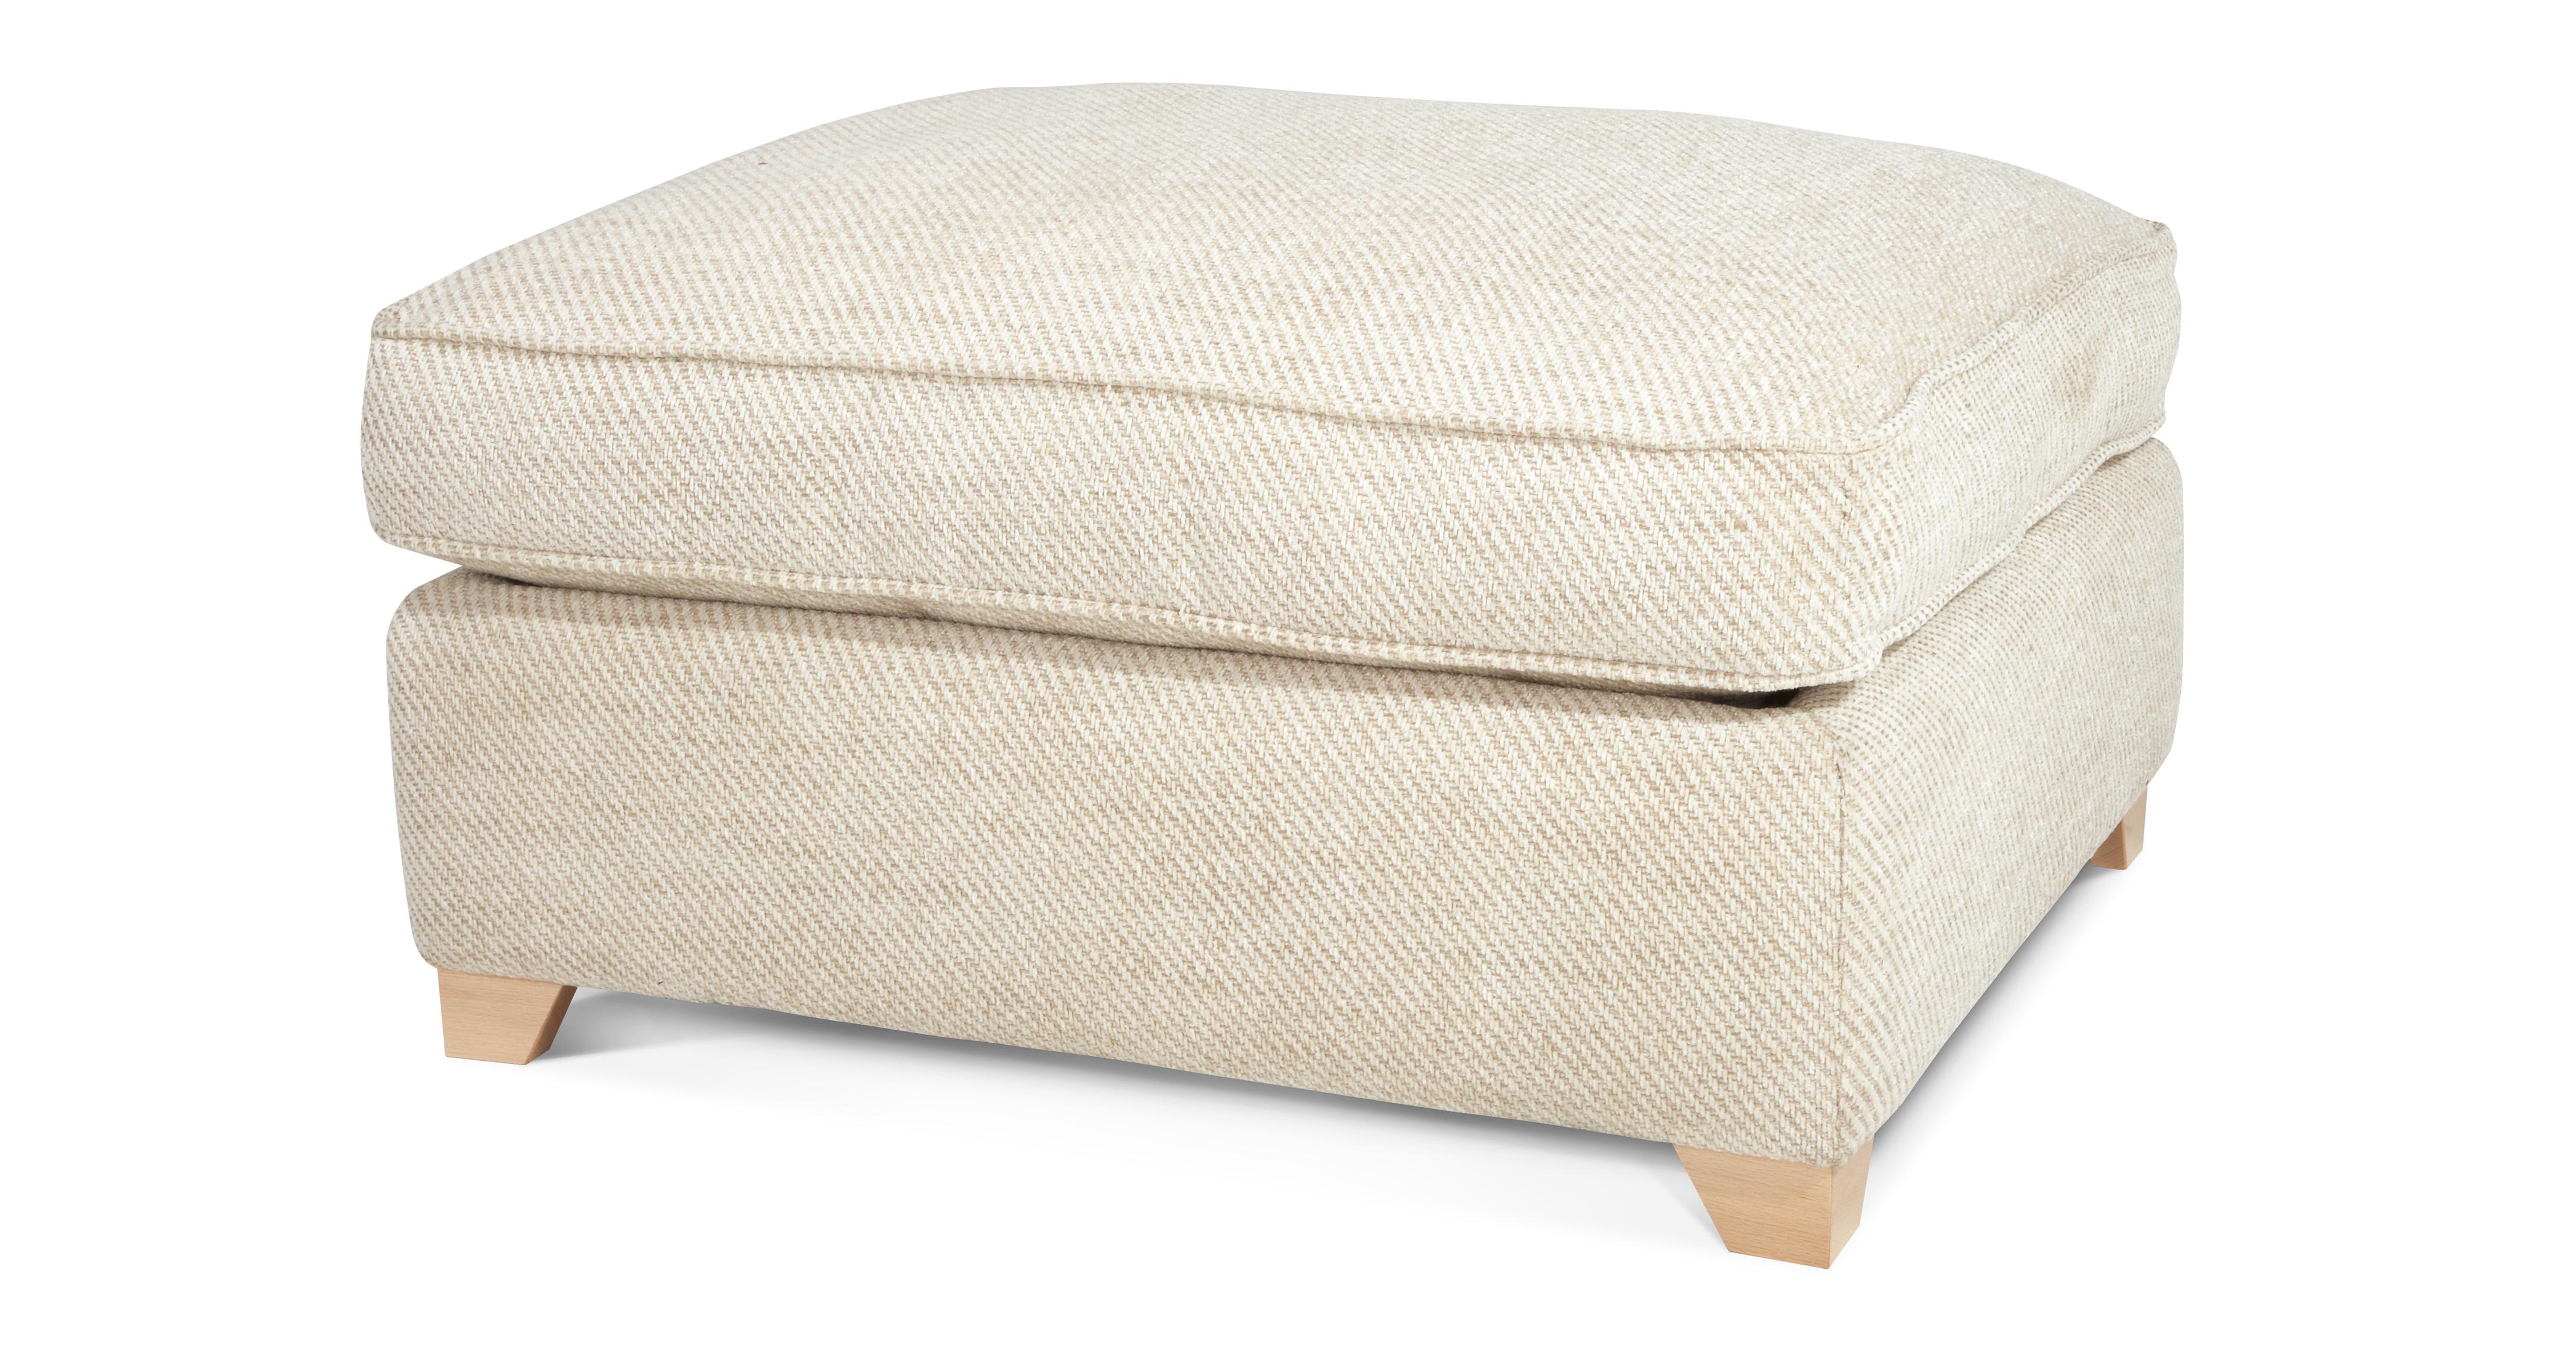 footstool sofa bed dfs